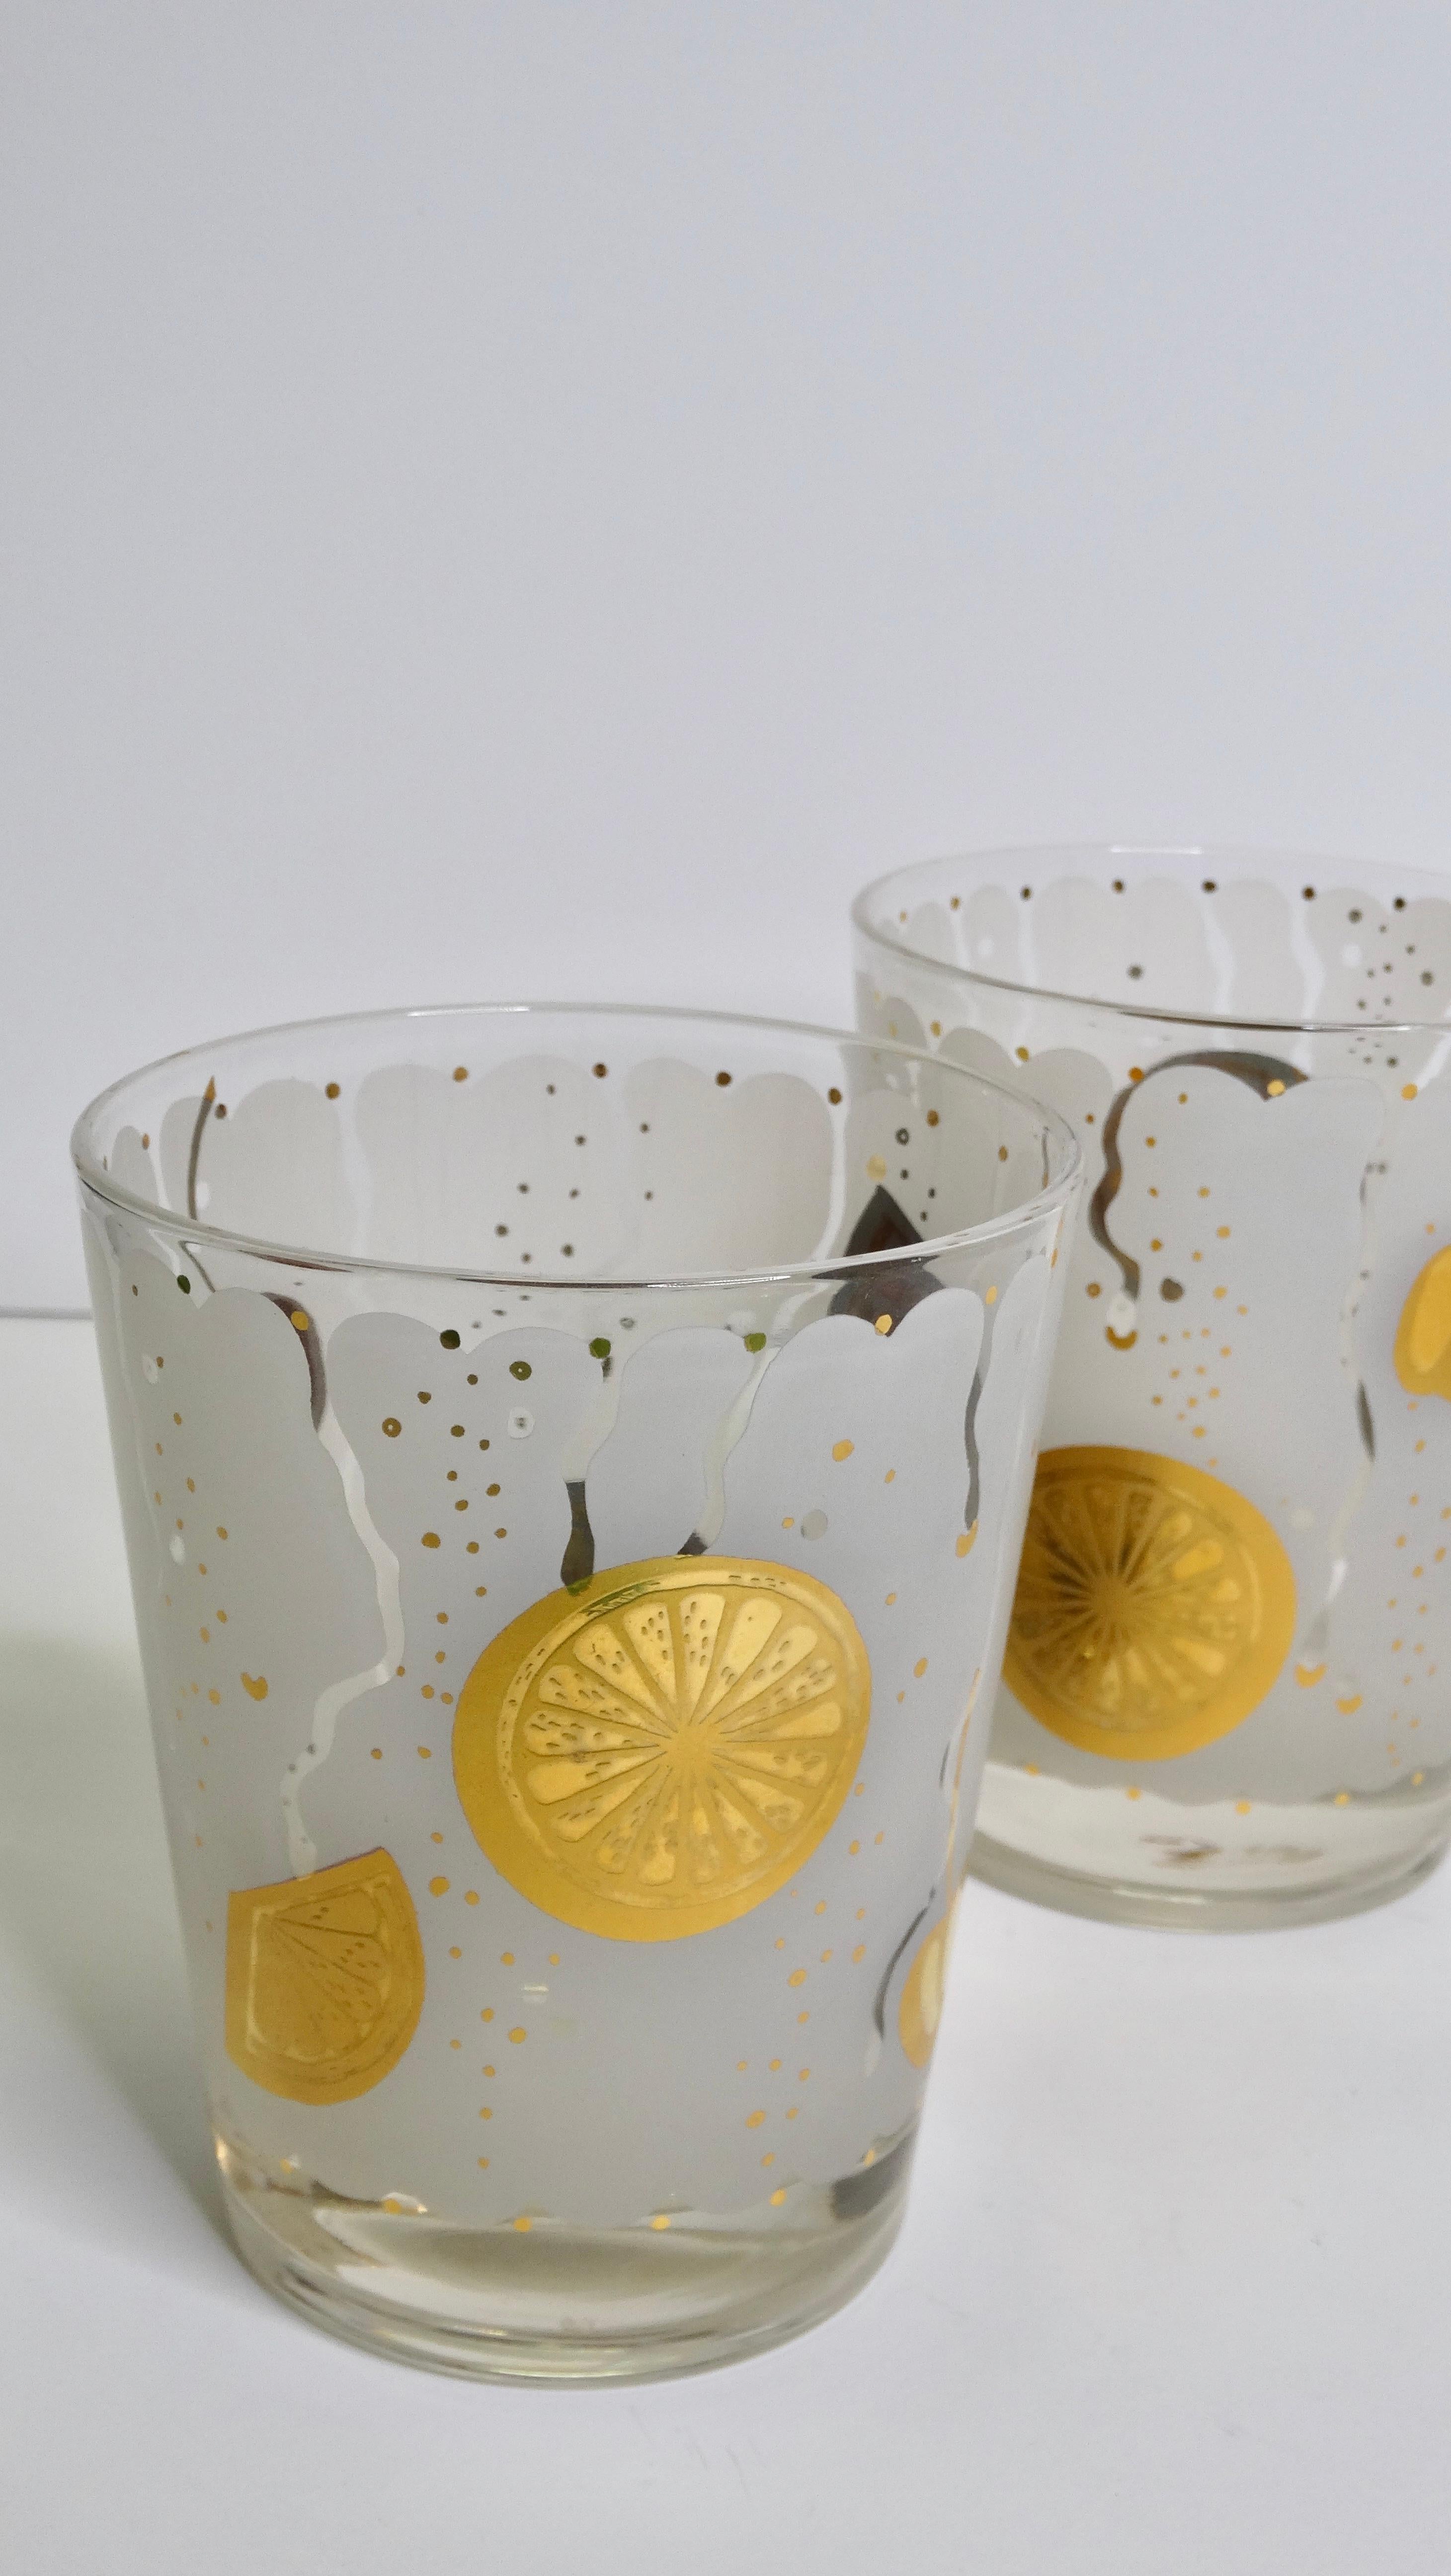 Barware collectors right this way! Snag this one of a kind glassware set for your next dinner party or give as a gift to your favorite host to show gratitude! Trust me, cocktails will always taste better in fine barware. These glasses come in a set